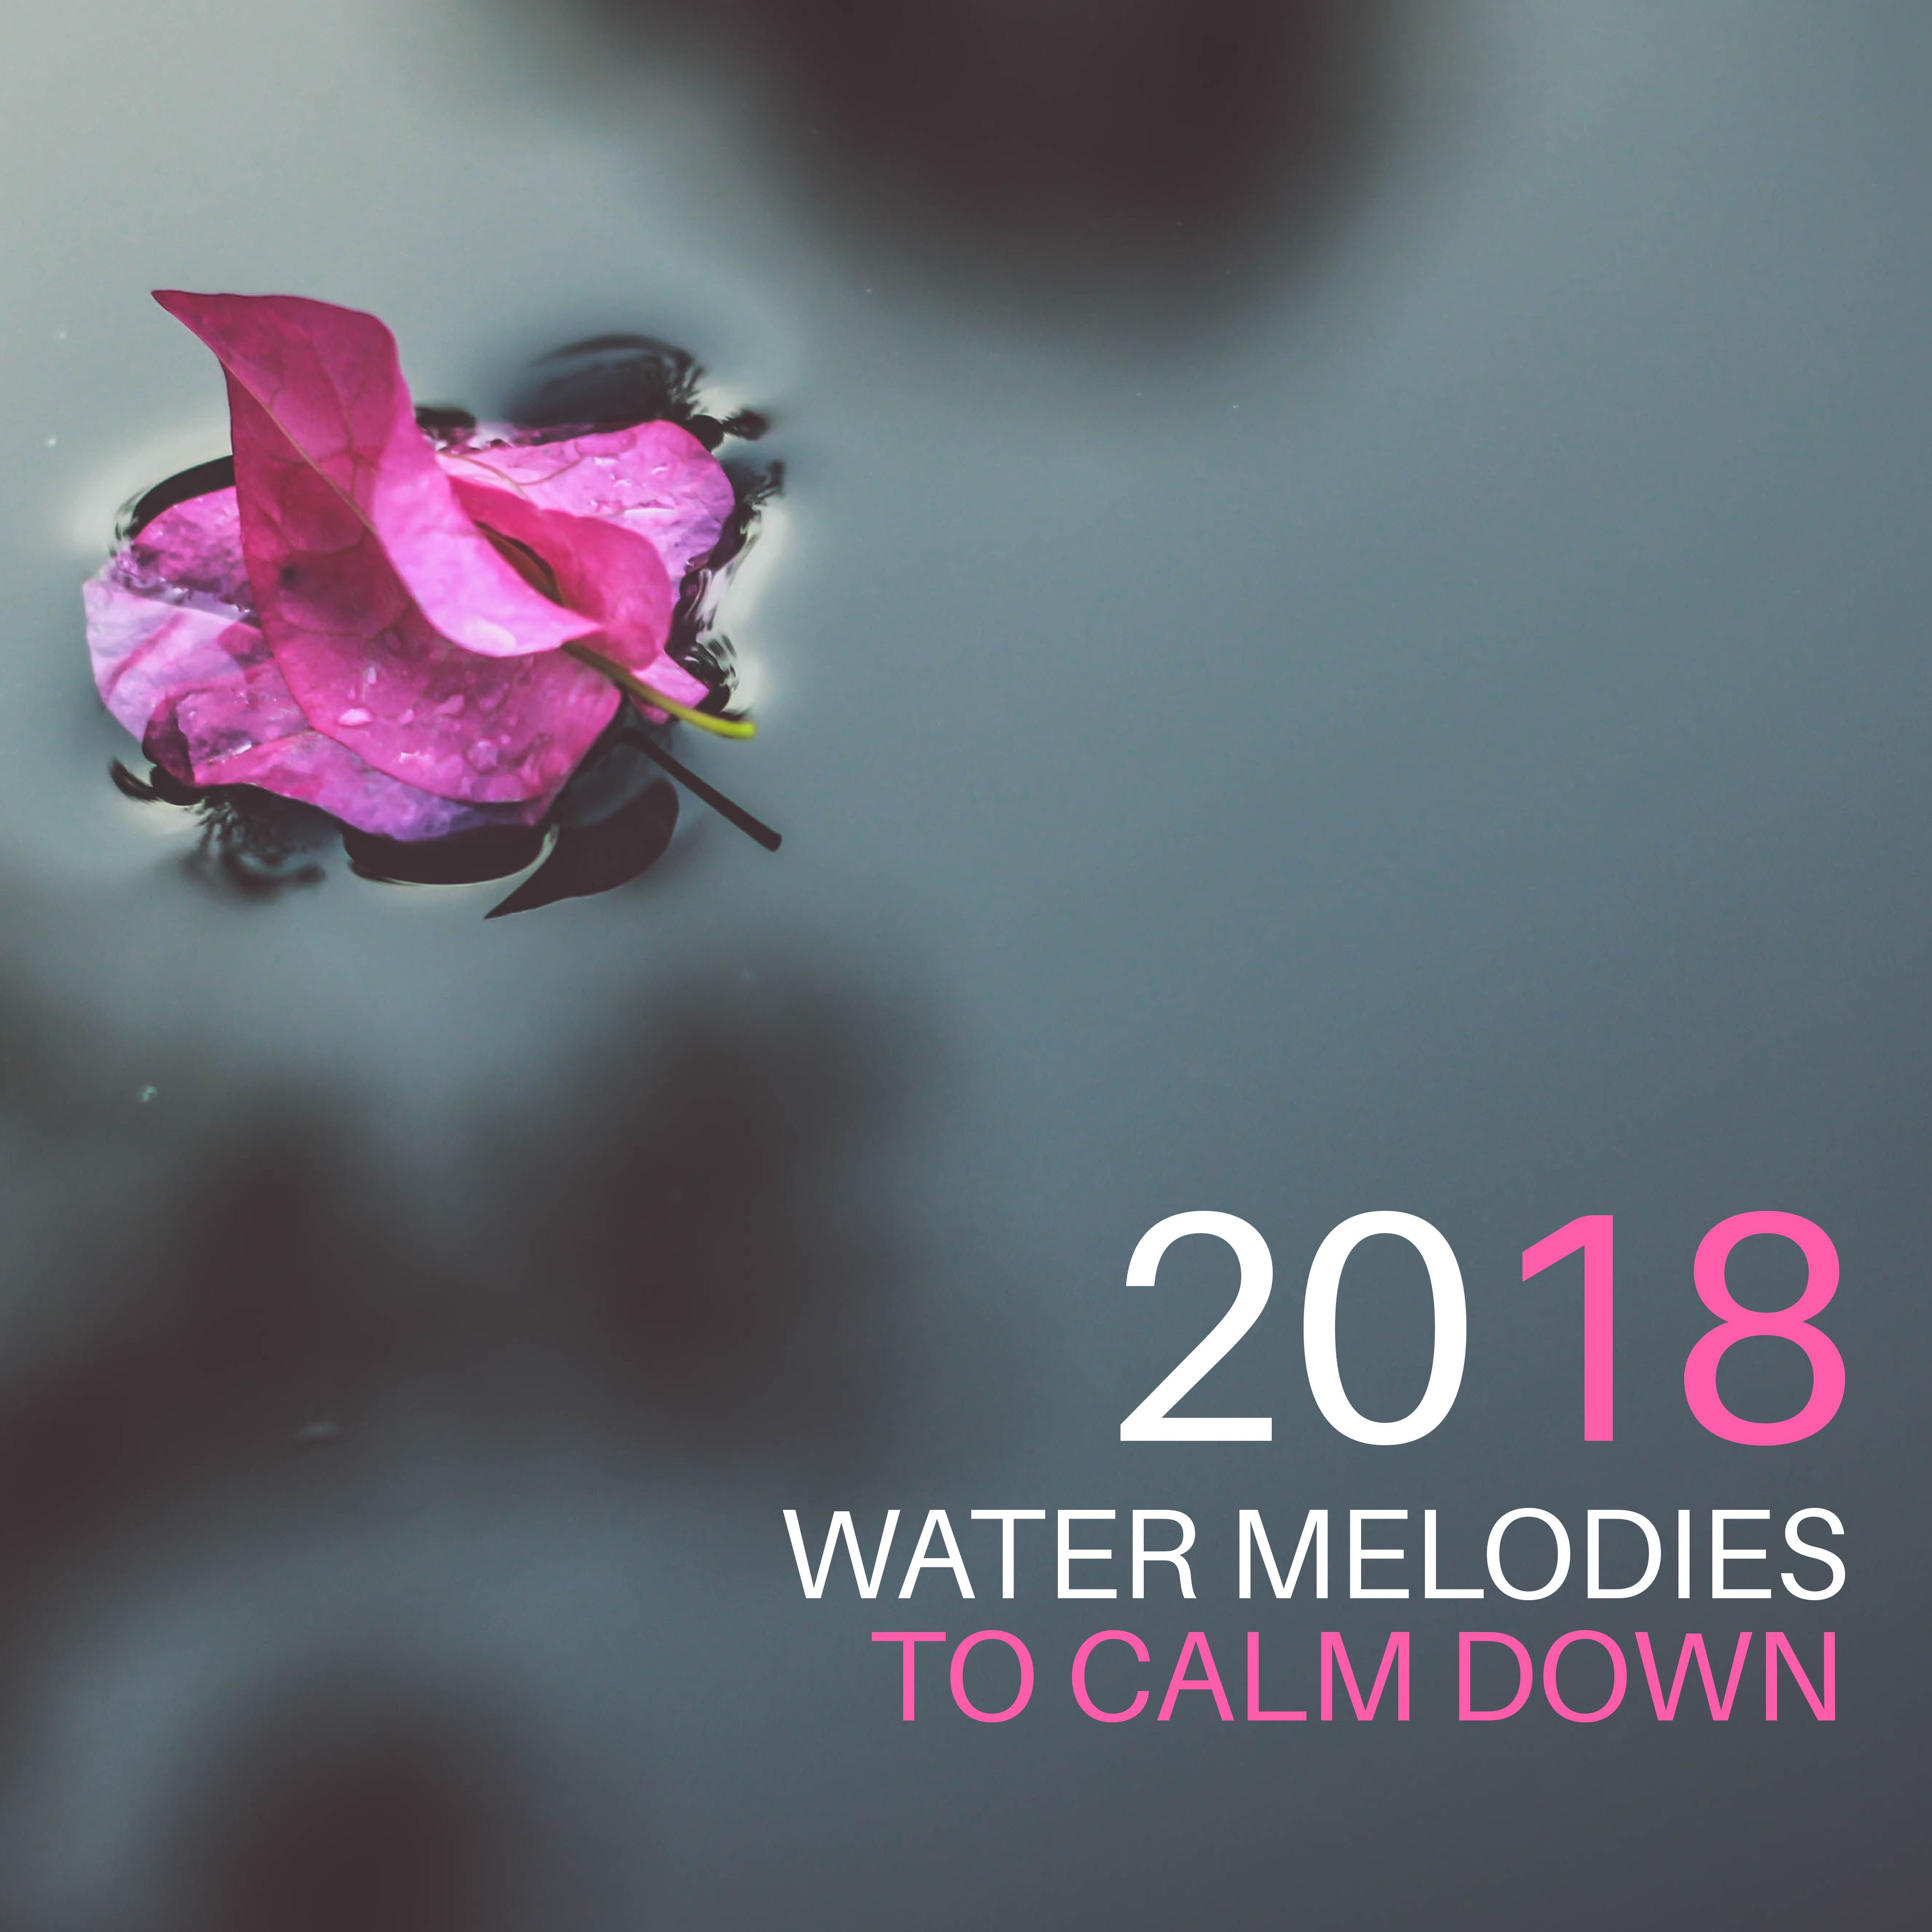 2018 Water Melodies to Calm Down